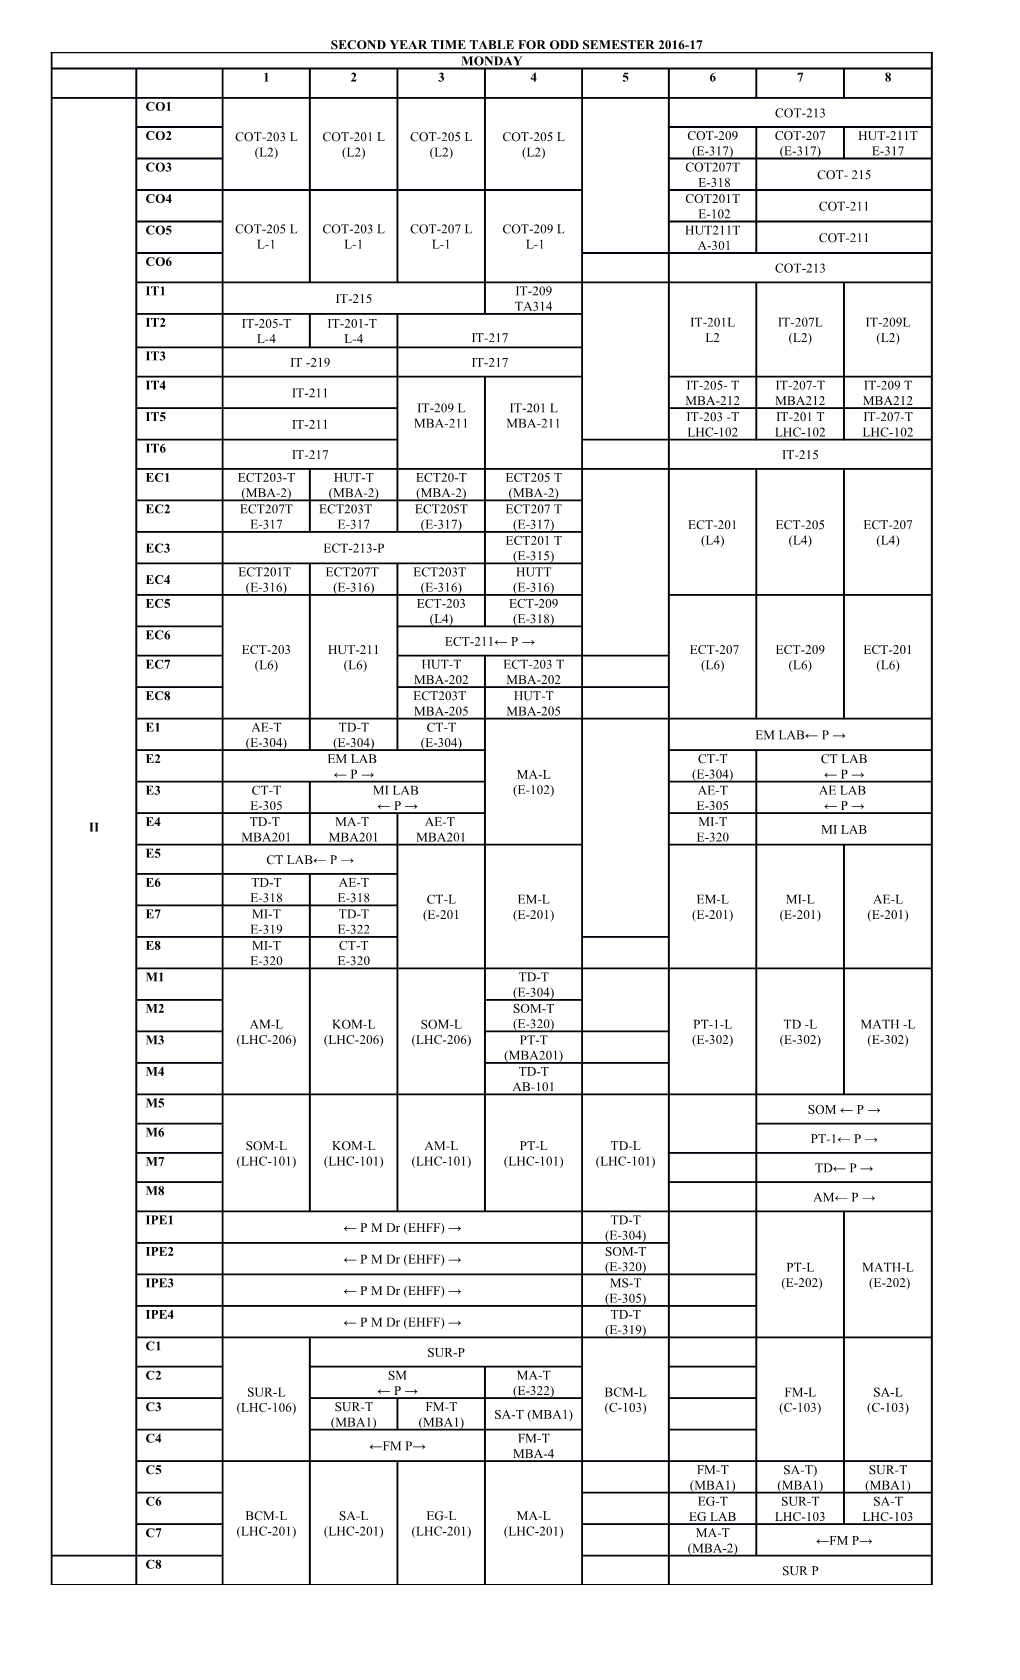 Second Year Time Table for Odd Semester 2016-17